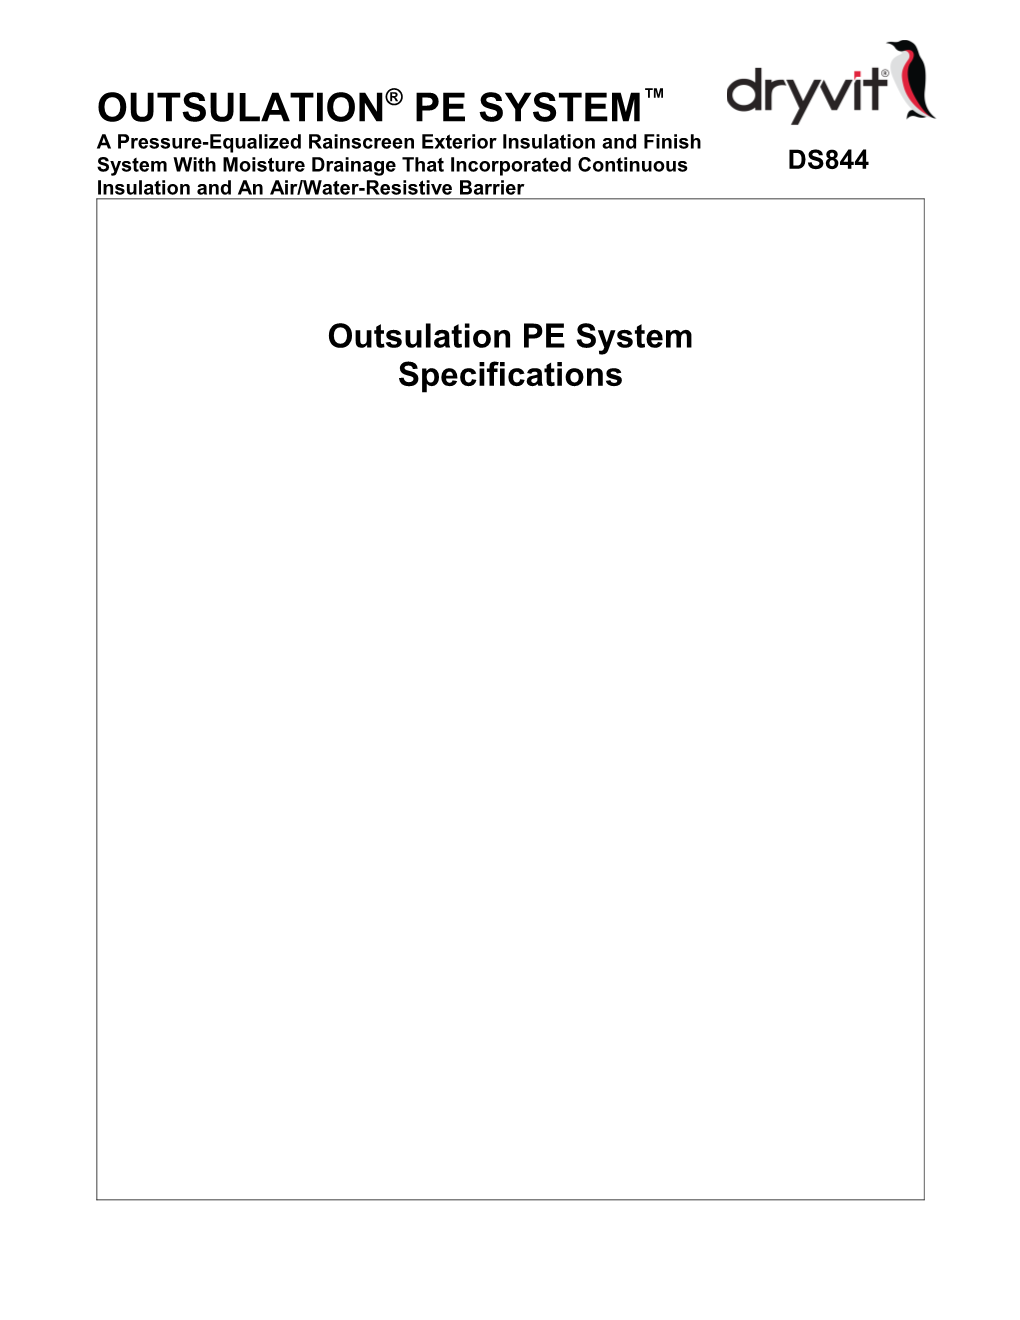 Outsulation PE System - DS844